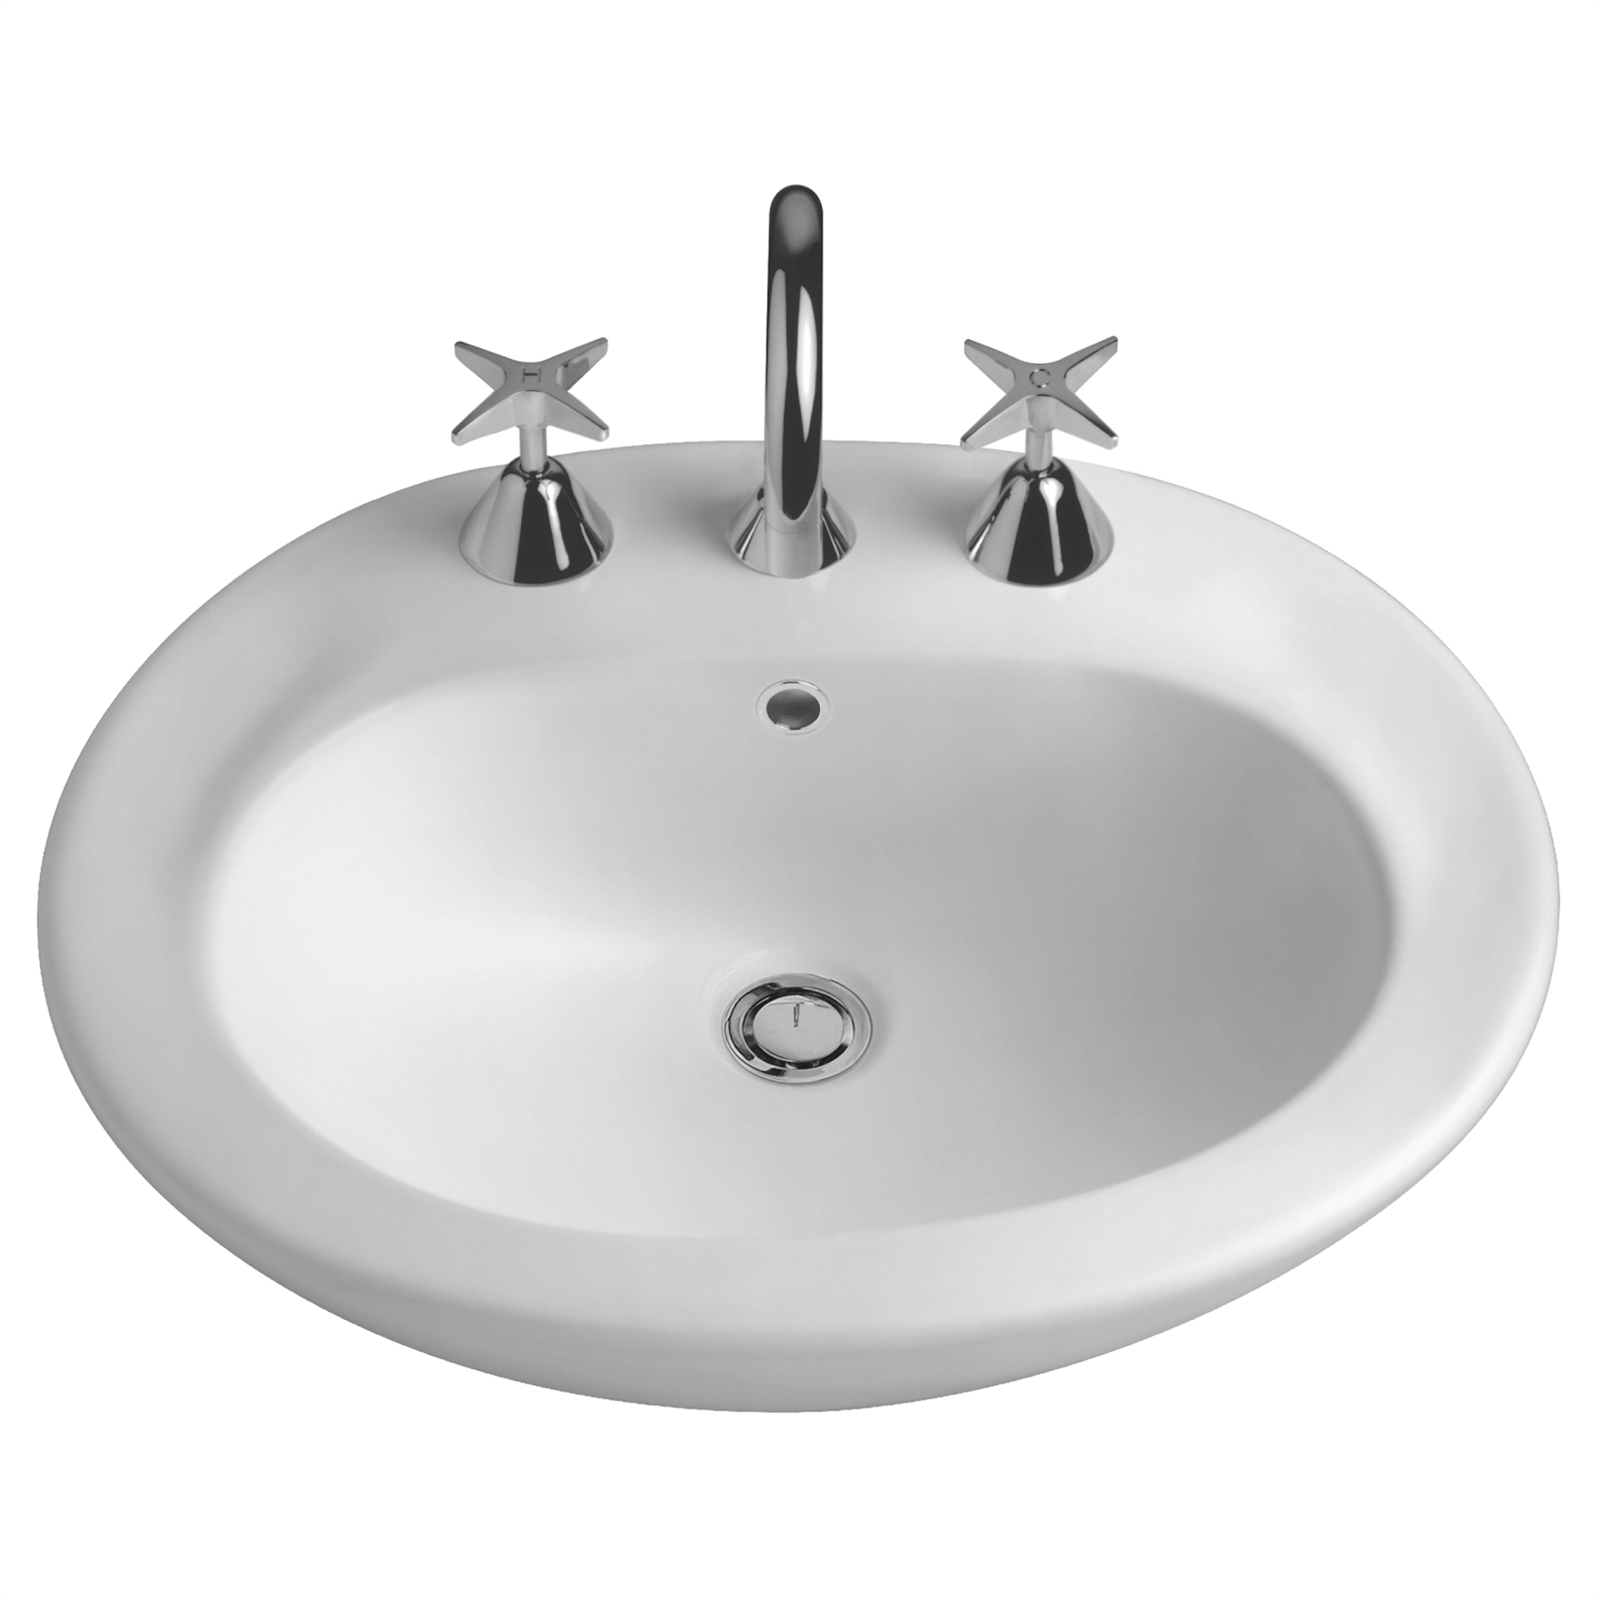 Caroma Concorde Semi Recessed Vanity Basin with 3 Tap Holes